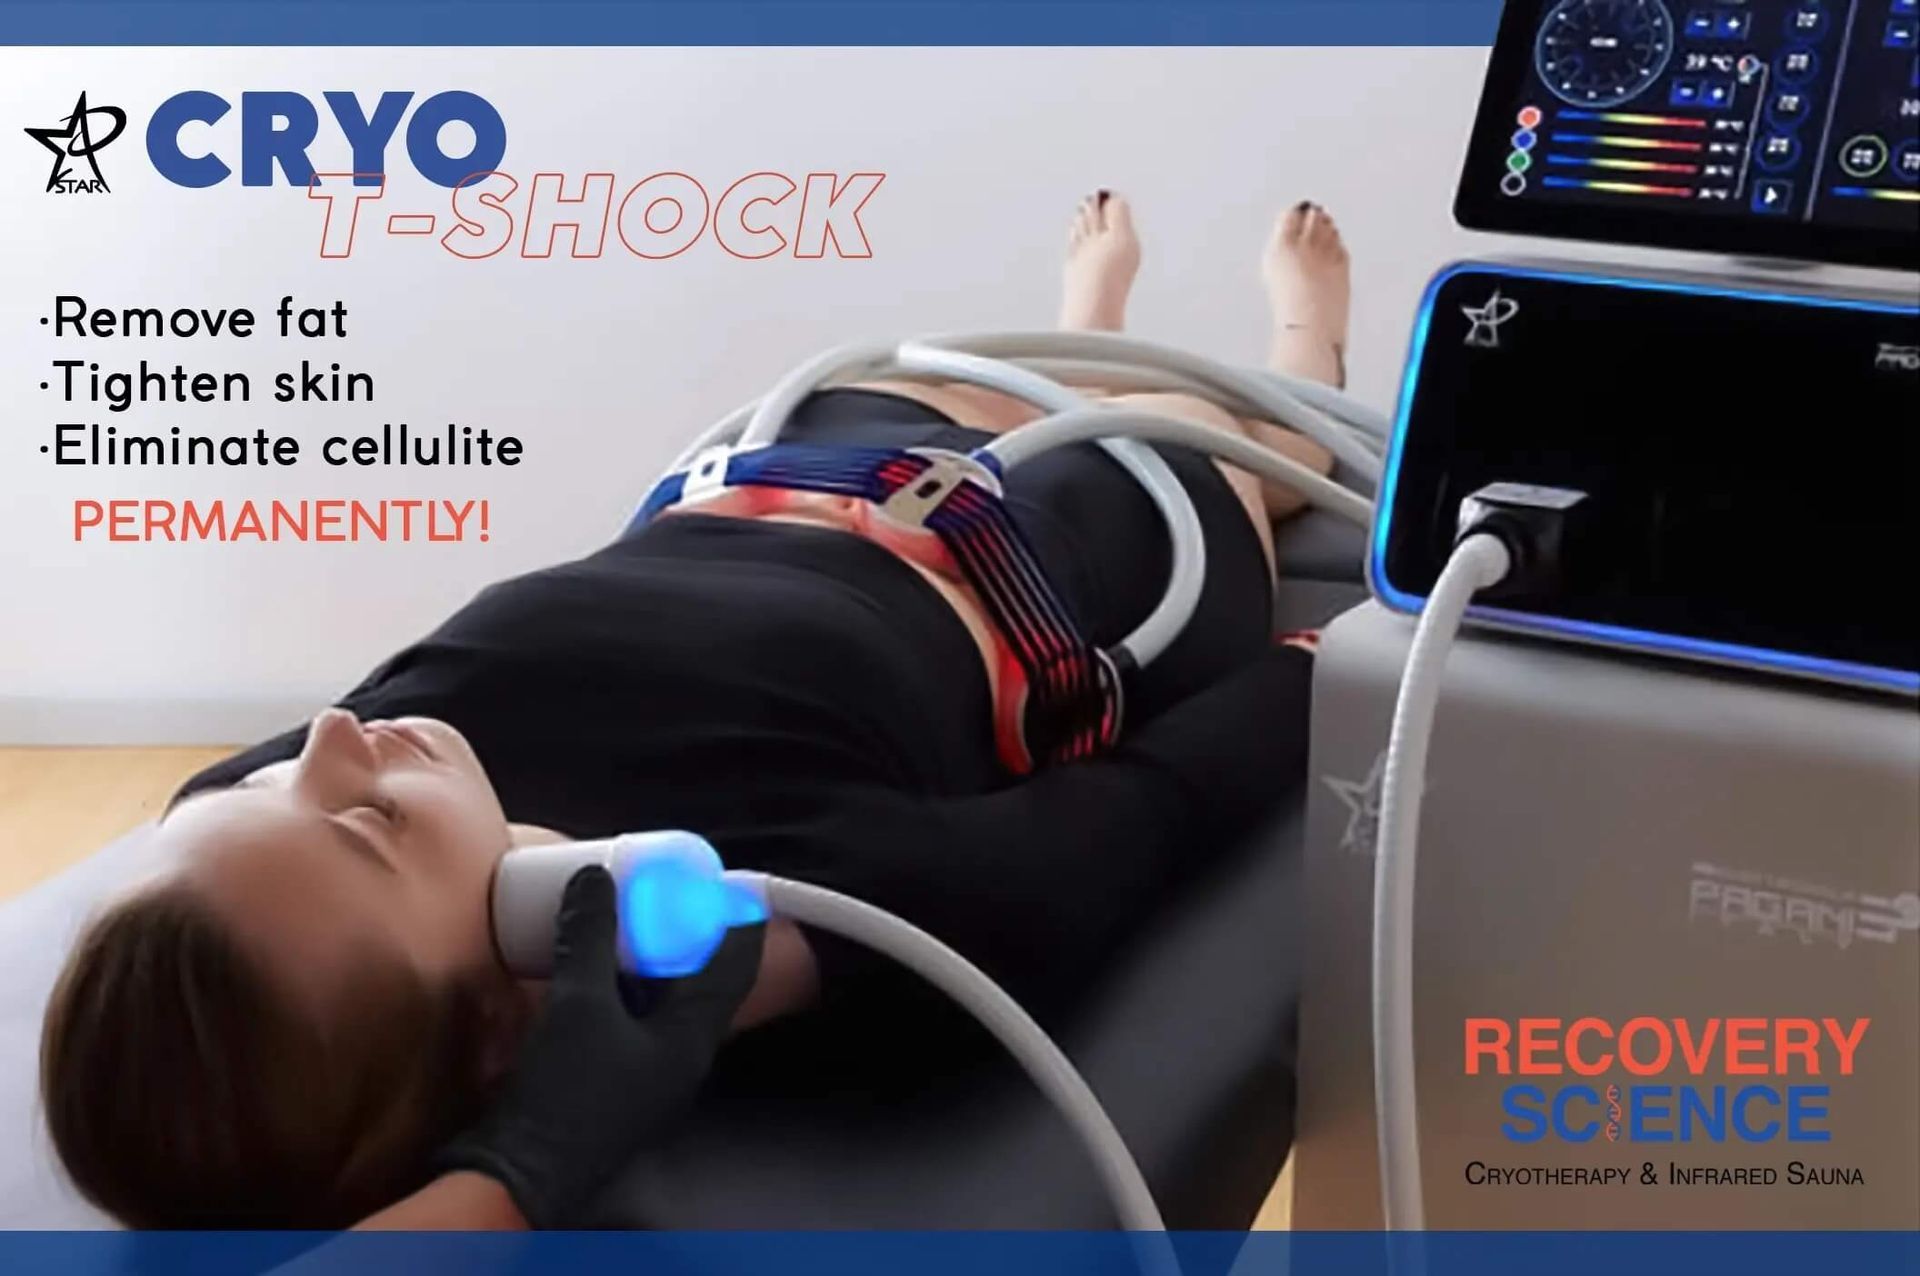 Benefits of cryo sculpting with Star T-Shock